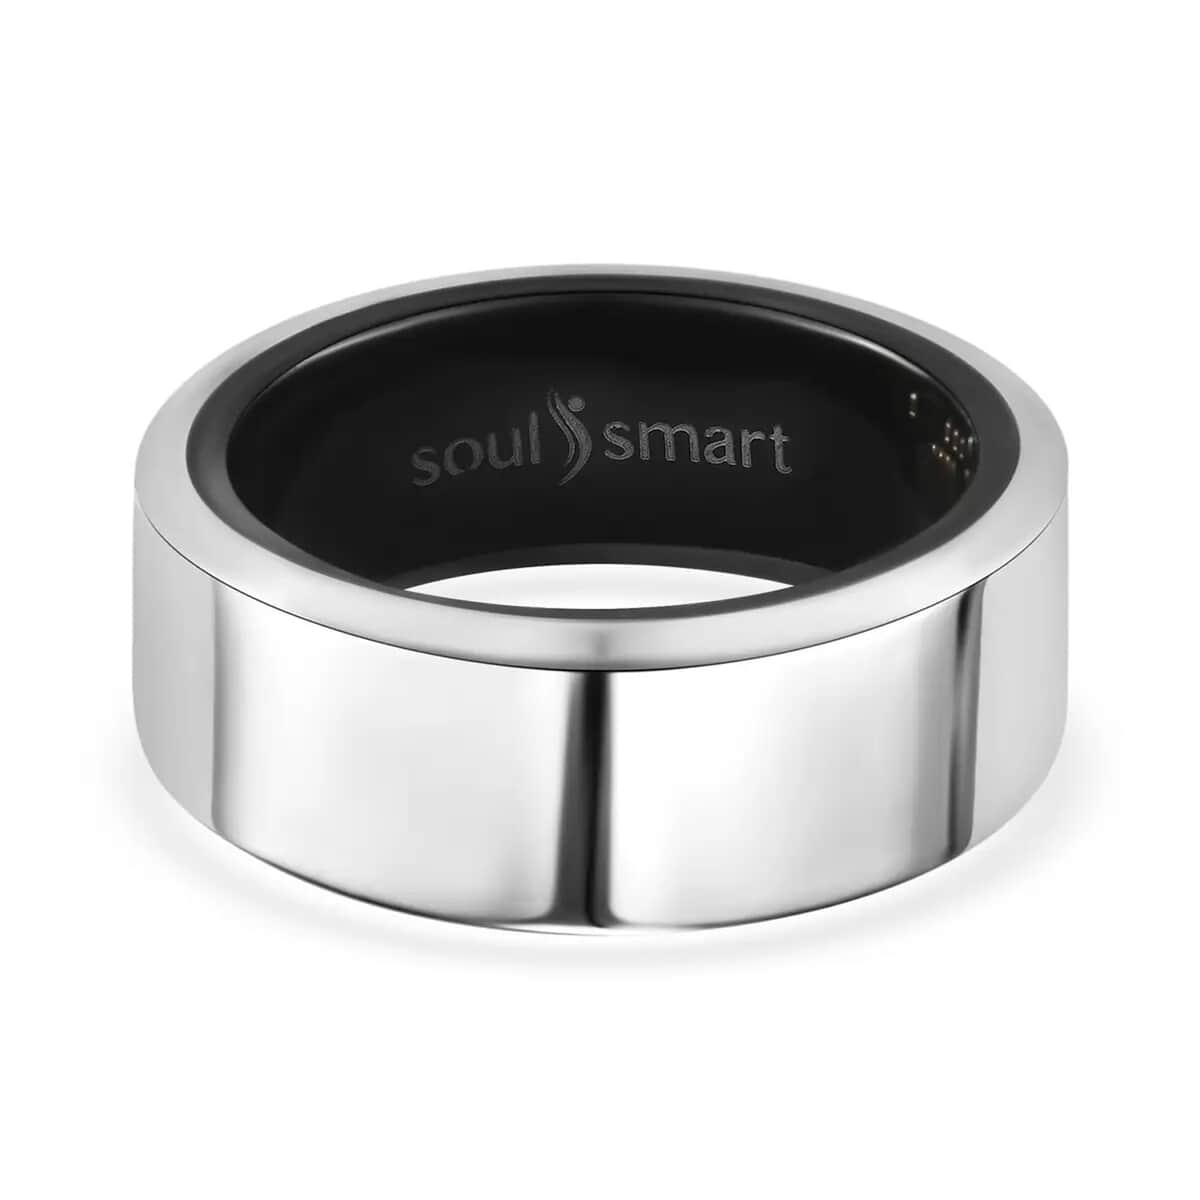 Soulsmart Multifunctional Health Tracker Smart Ring (Size 9.0) in Stainless Steel (Compatible with Android 5.0+ & Apple IOS 10.0+ Systems) image number 2